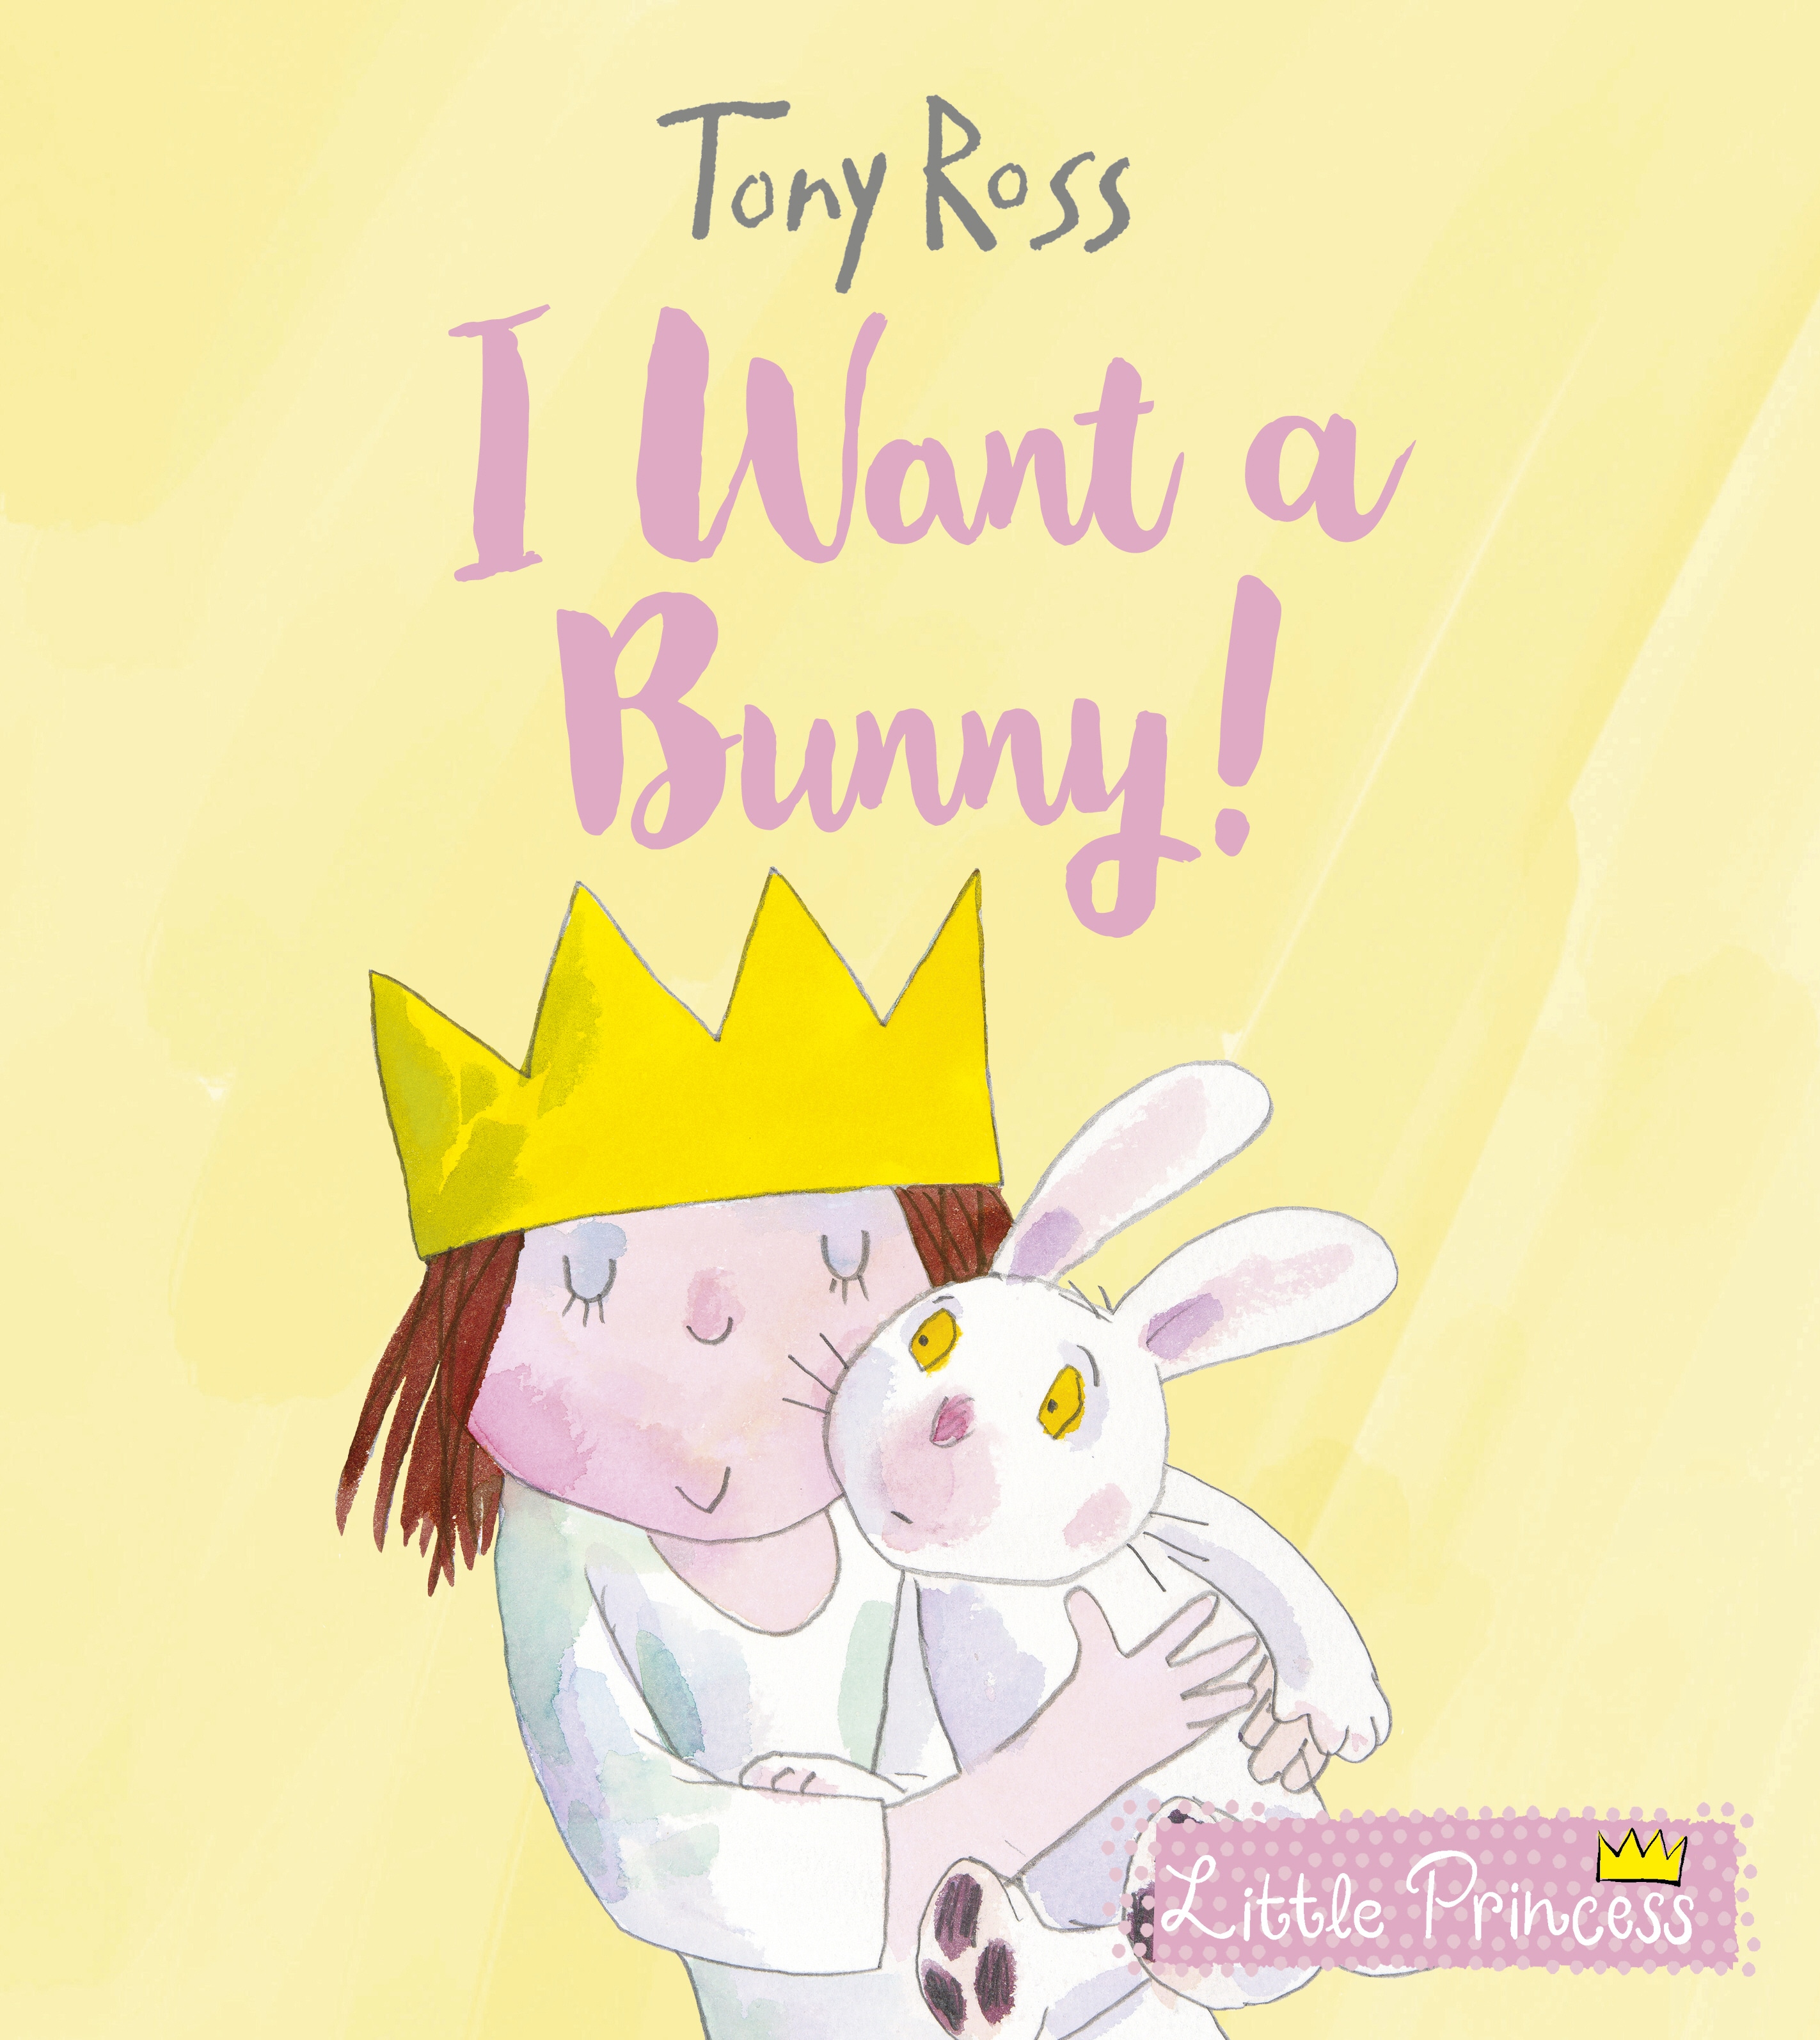 Book “I Want a Bunny!” by Tony Ross — March 5, 2020